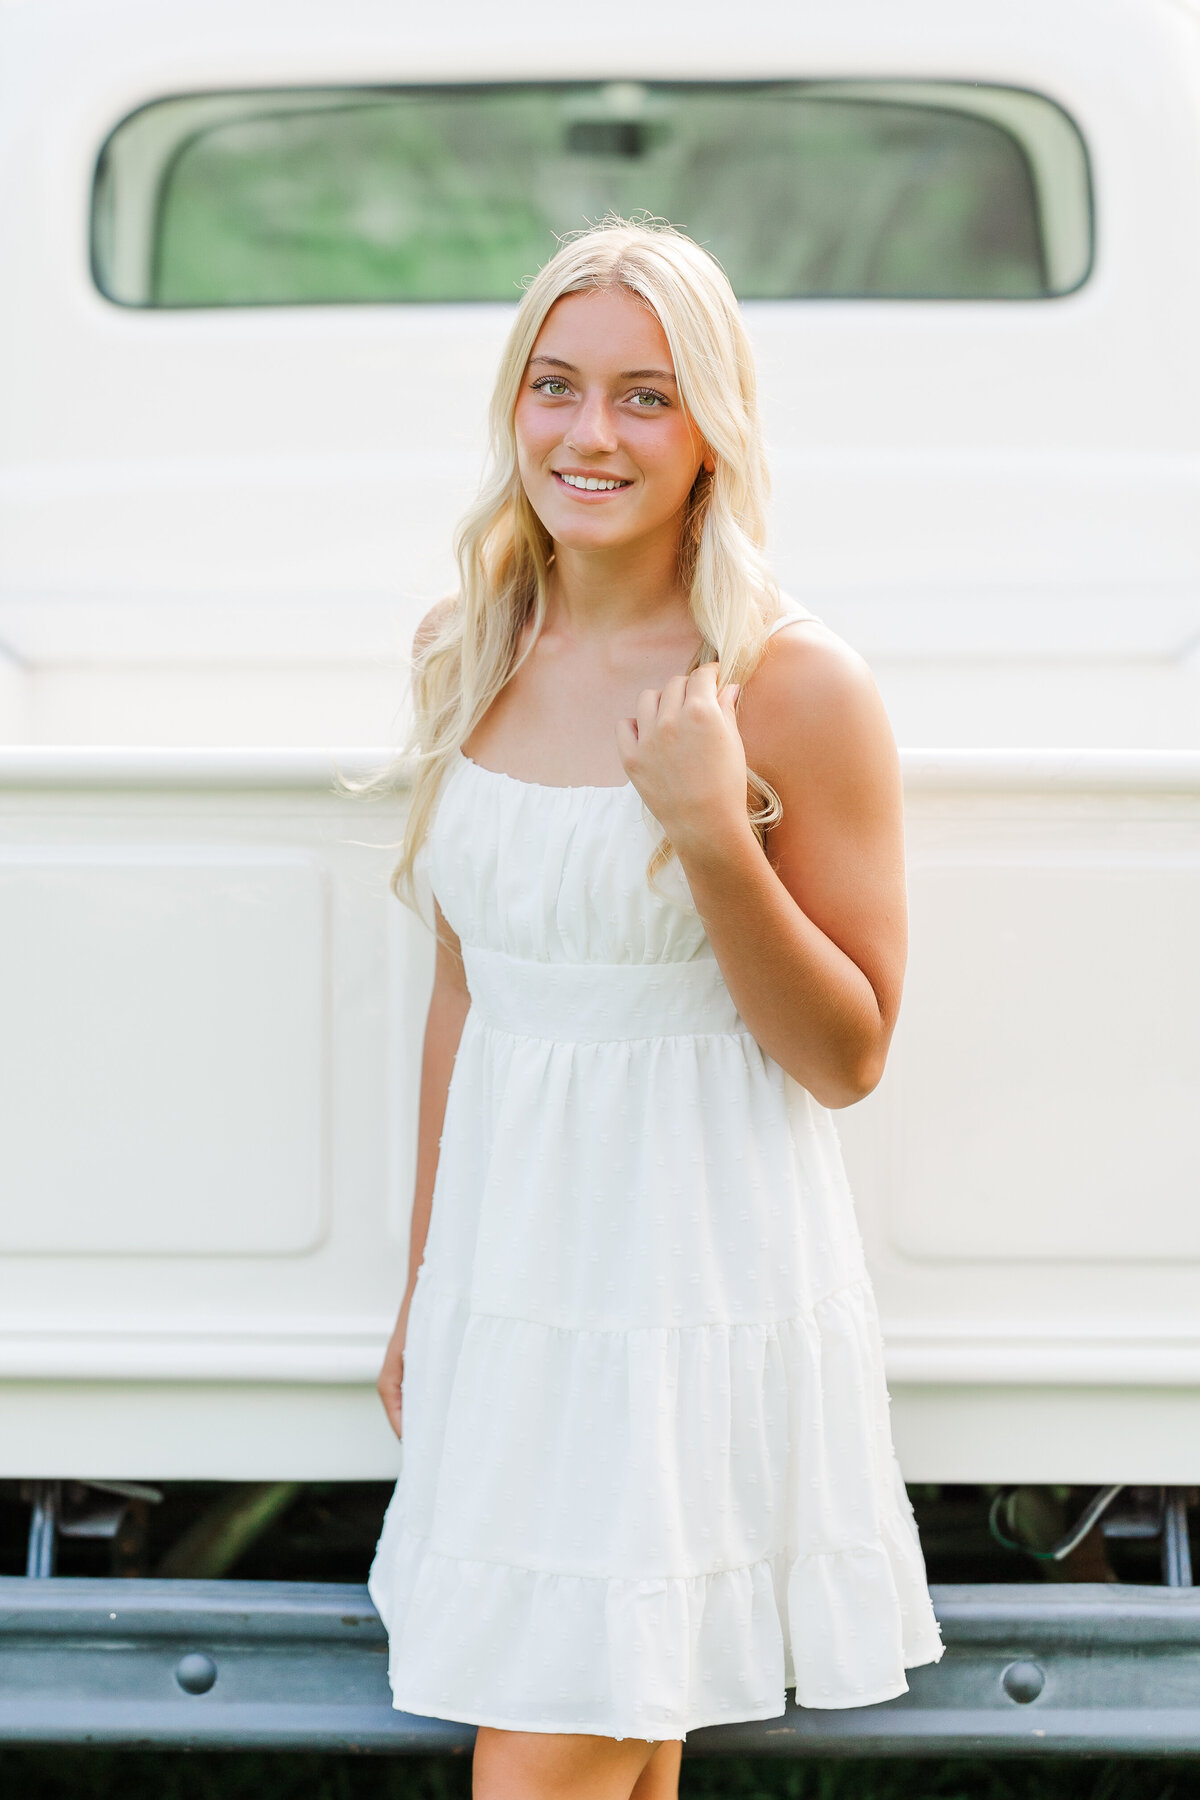 Girl in a white dress standing by a white vintage truck outdoors in North East, PA.